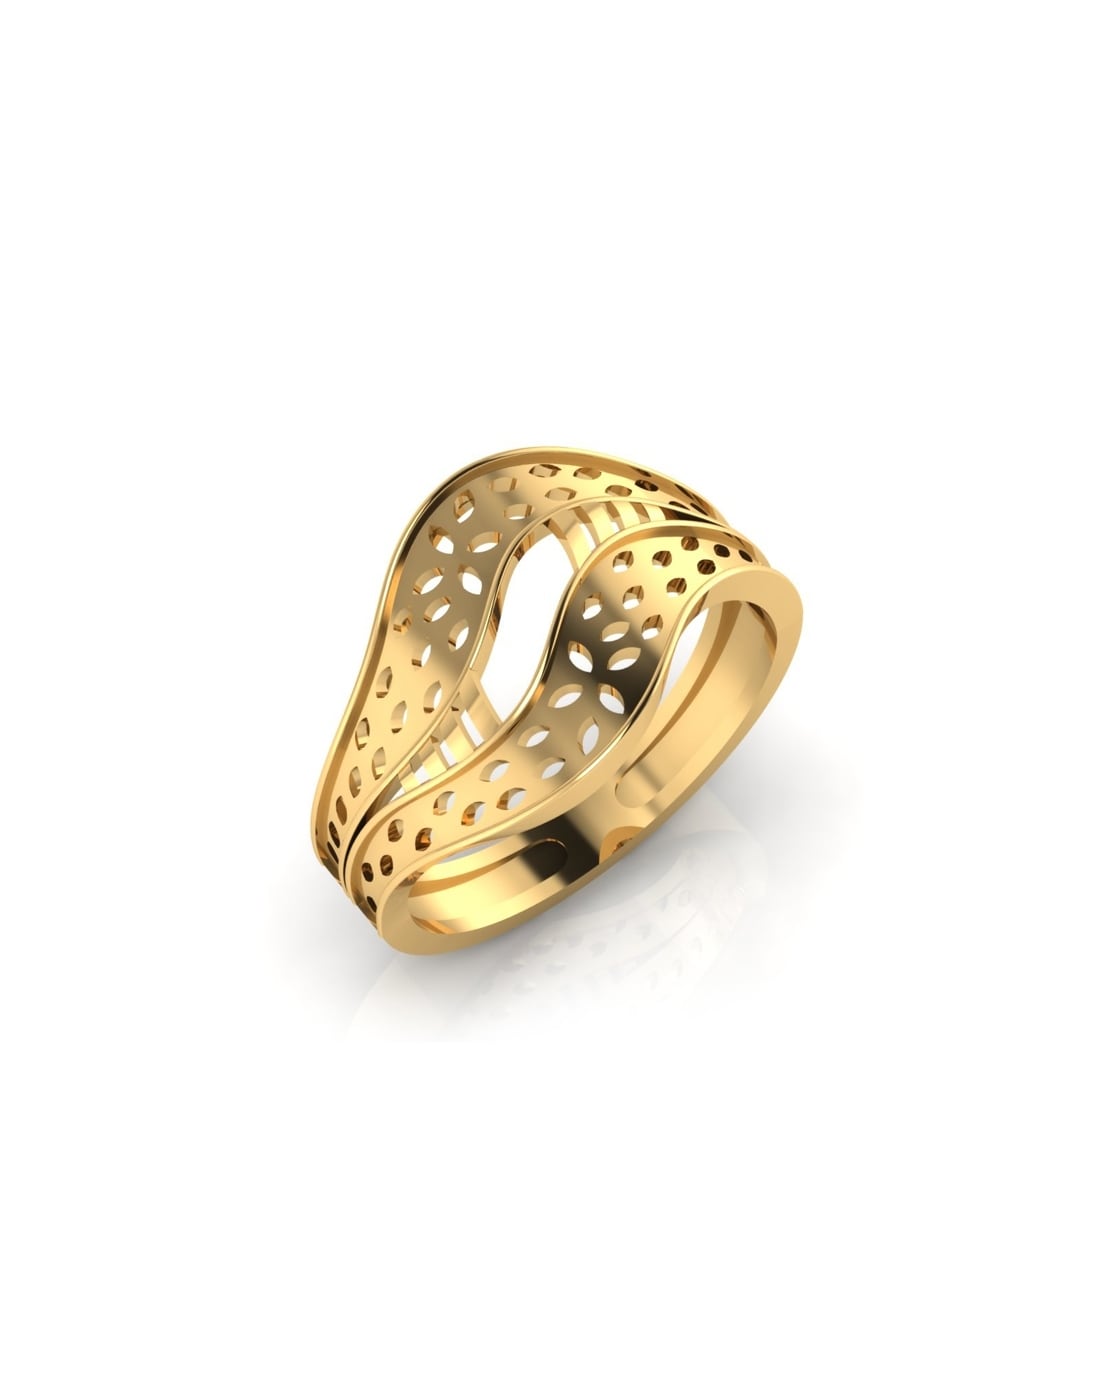 Handcrafted Rose Gold Adjustable Ring for Women | FashionCrab.com